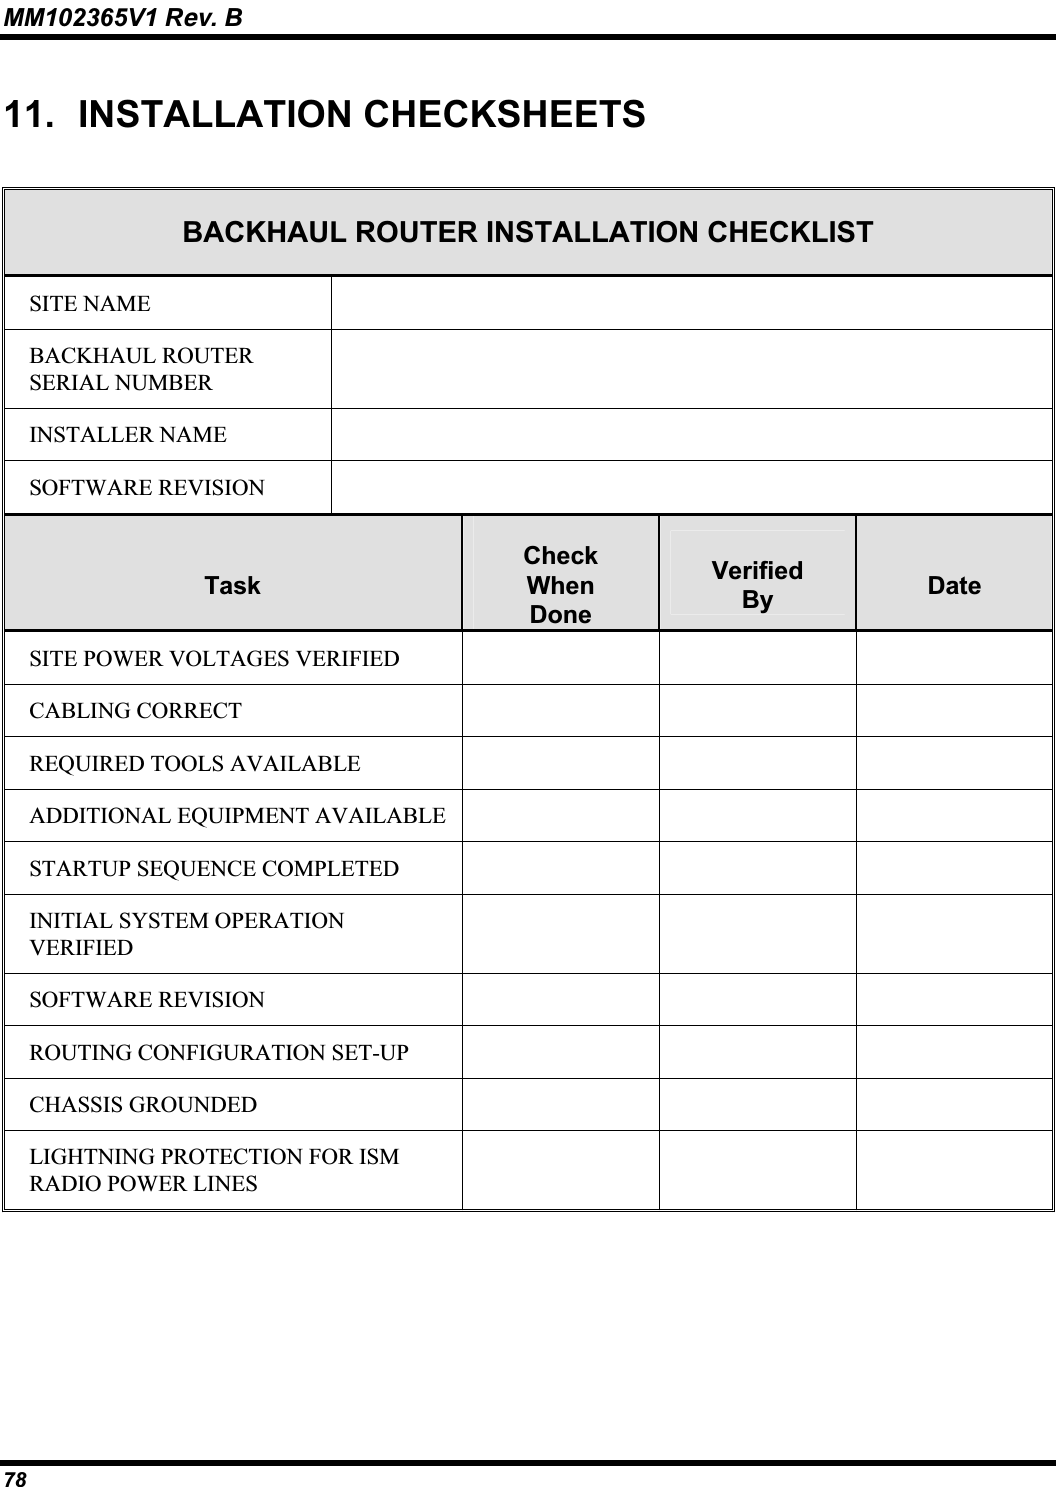 MM102365V1 Rev. B 11. INSTALLATION CHECKSHEETSBACKHAUL ROUTER INSTALLATION CHECKLIST SITE NAME BACKHAUL ROUTERSERIAL NUMBER INSTALLER NAME SOFTWARE REVISION TaskCheckWhenDoneVerifiedBy DateSITE POWER VOLTAGES VERIFIED CABLING CORRECT REQUIRED TOOLS AVAILABLE ADDITIONAL EQUIPMENT AVAILABLE STARTUP SEQUENCE COMPLETED INITIAL SYSTEM OPERATION VERIFIEDSOFTWARE REVISION ROUTING CONFIGURATION SET-UP CHASSIS GROUNDED LIGHTNING PROTECTION FOR ISM RADIO POWER LINES 78